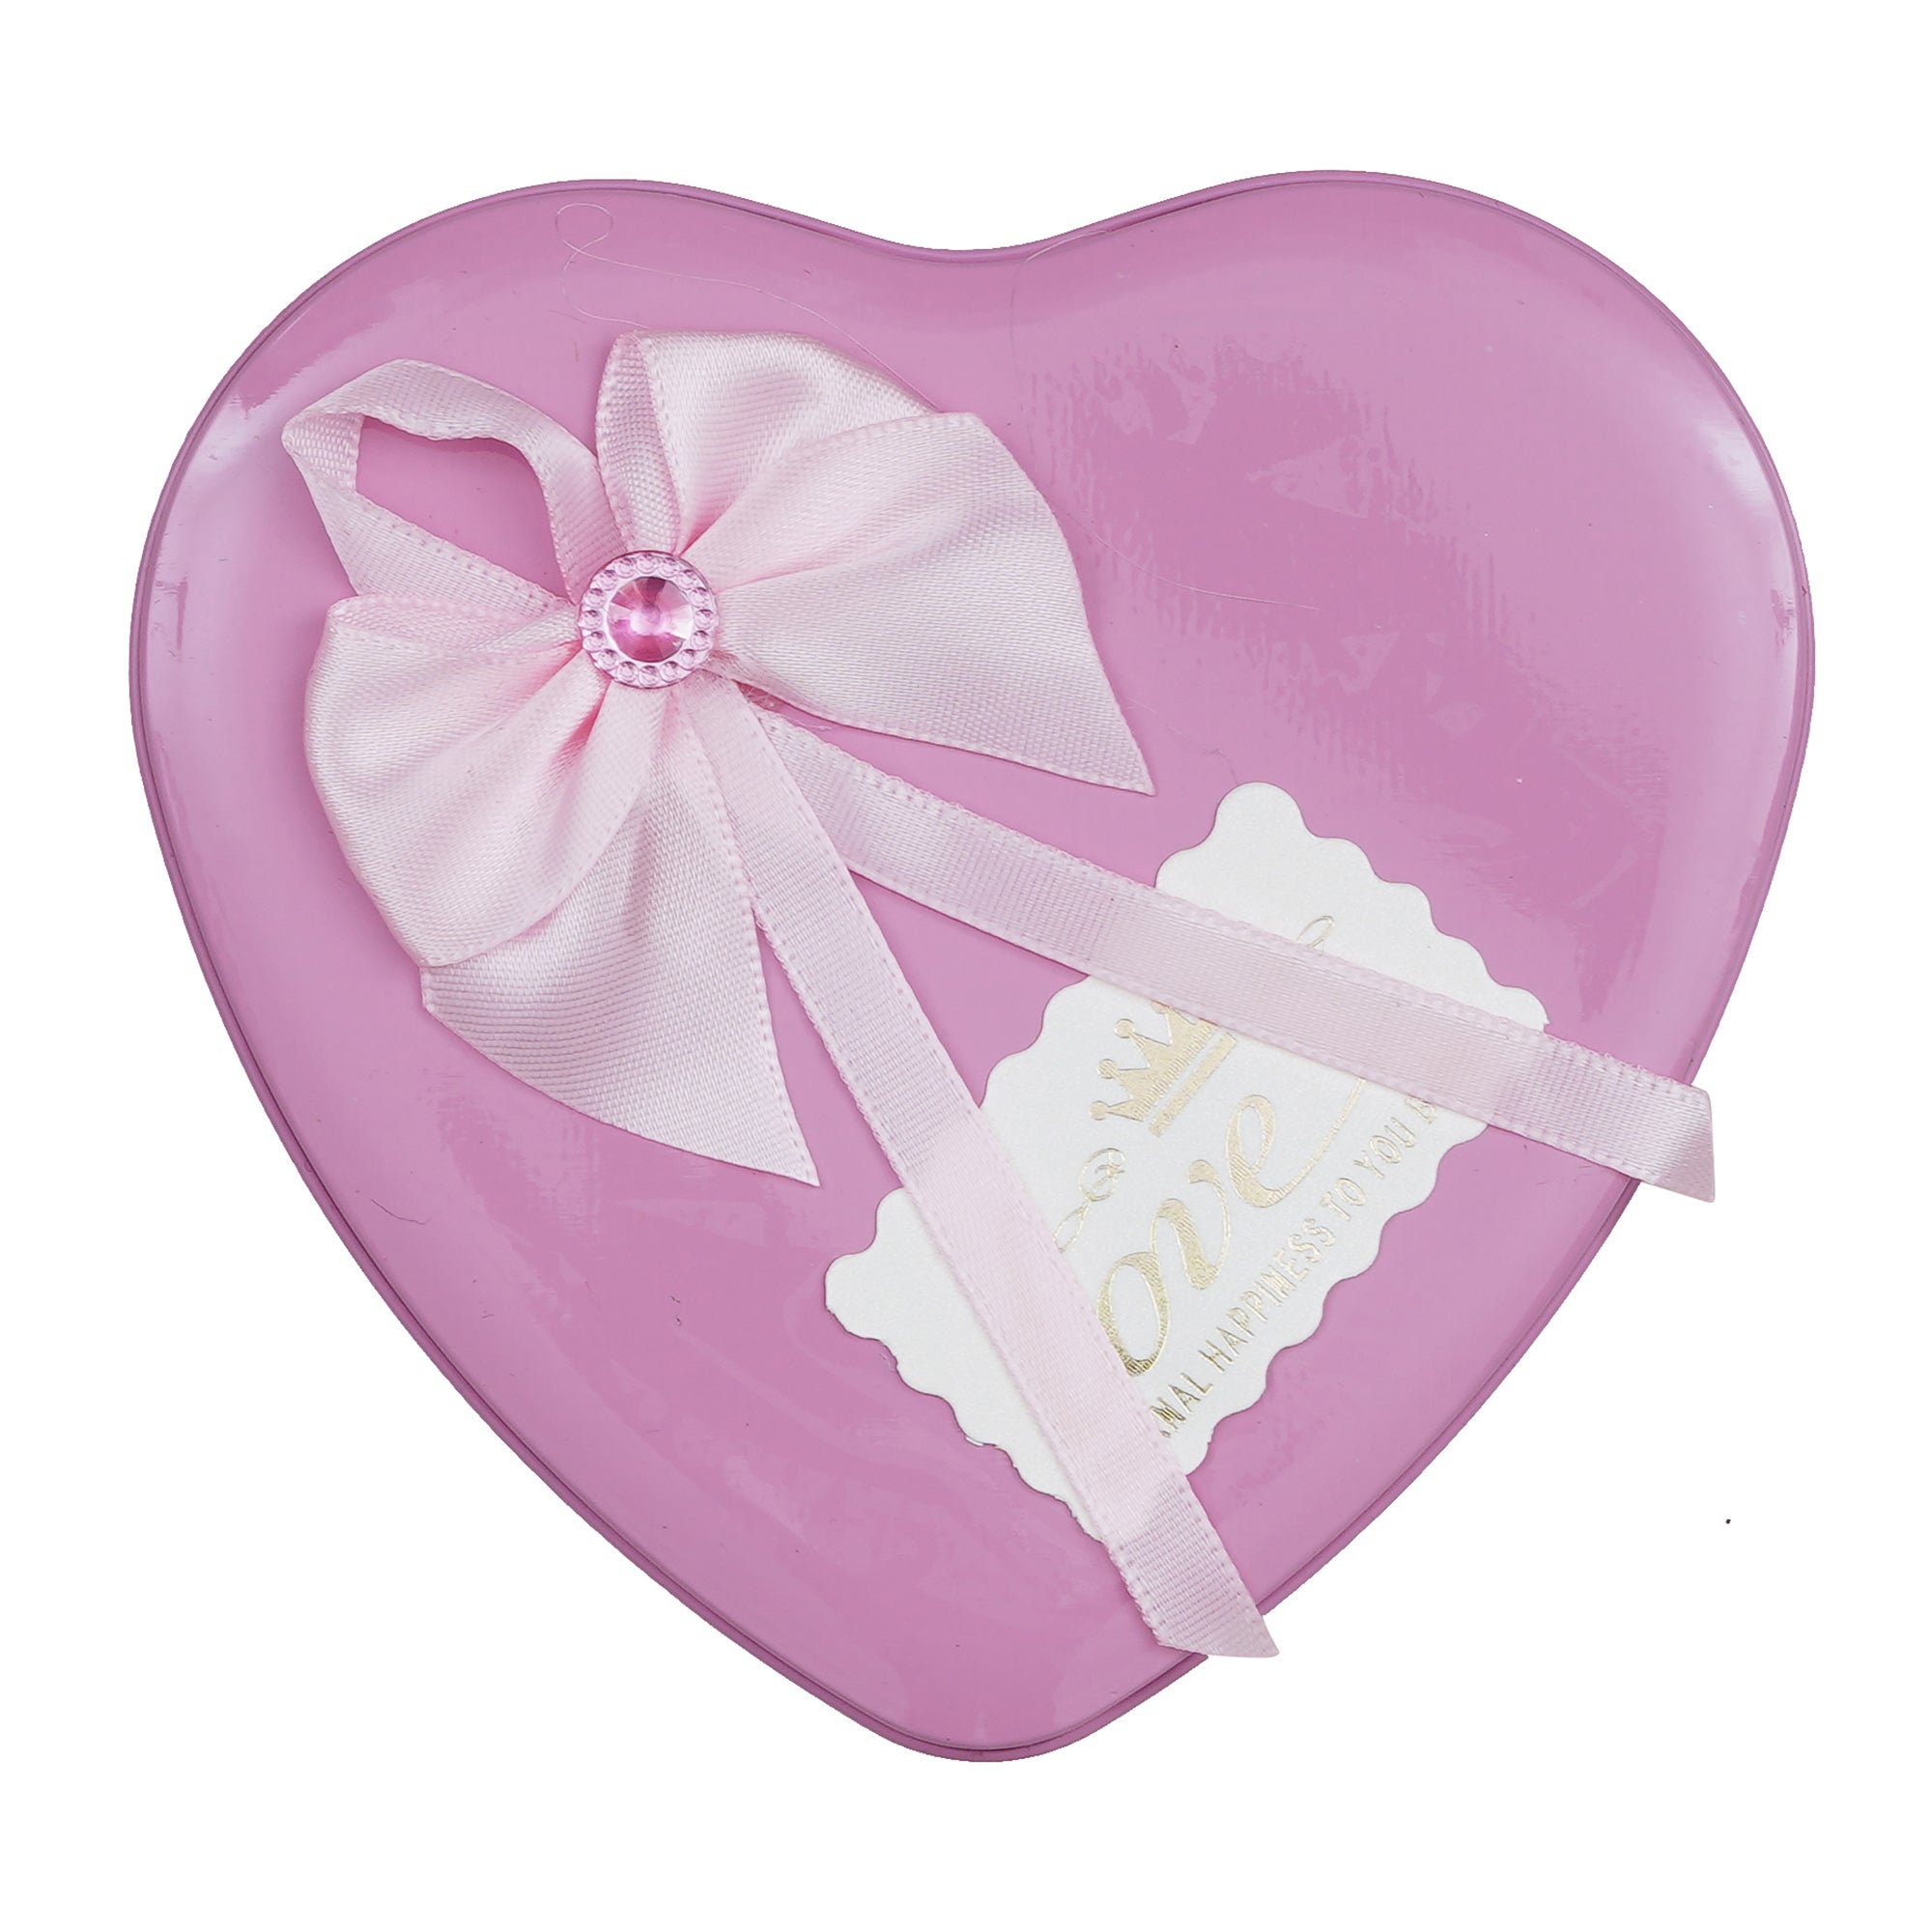 Pink Heart Shaped Gift Box With 3 Pink Roses, Teddy Bear, And A Card 5